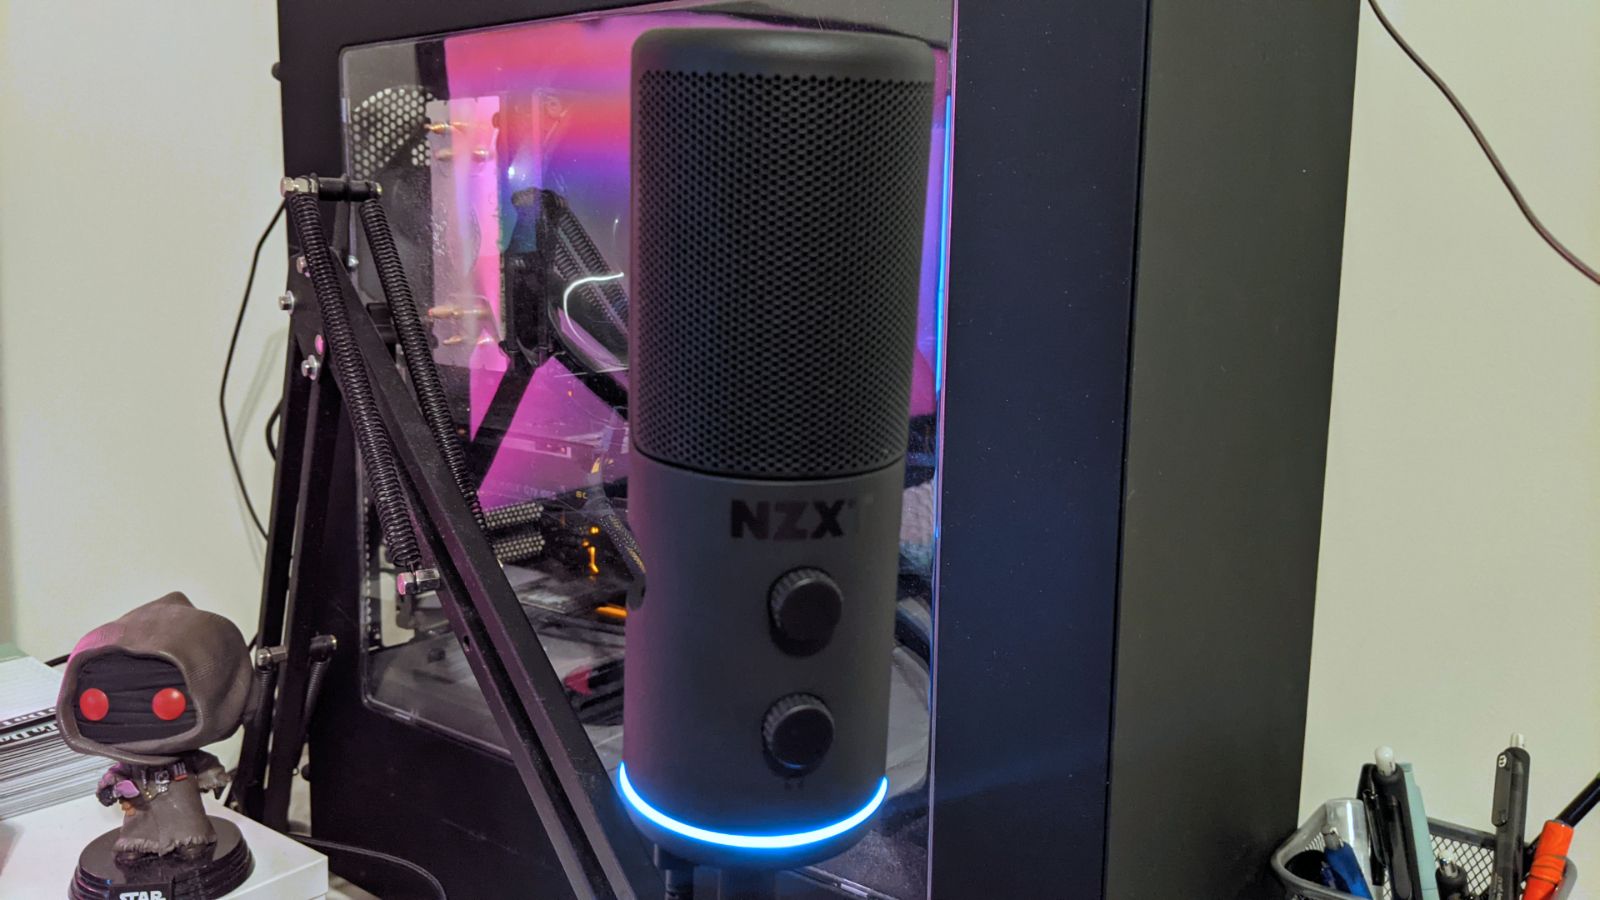 NZXT Capsule microphone on a boom arm in front of computer